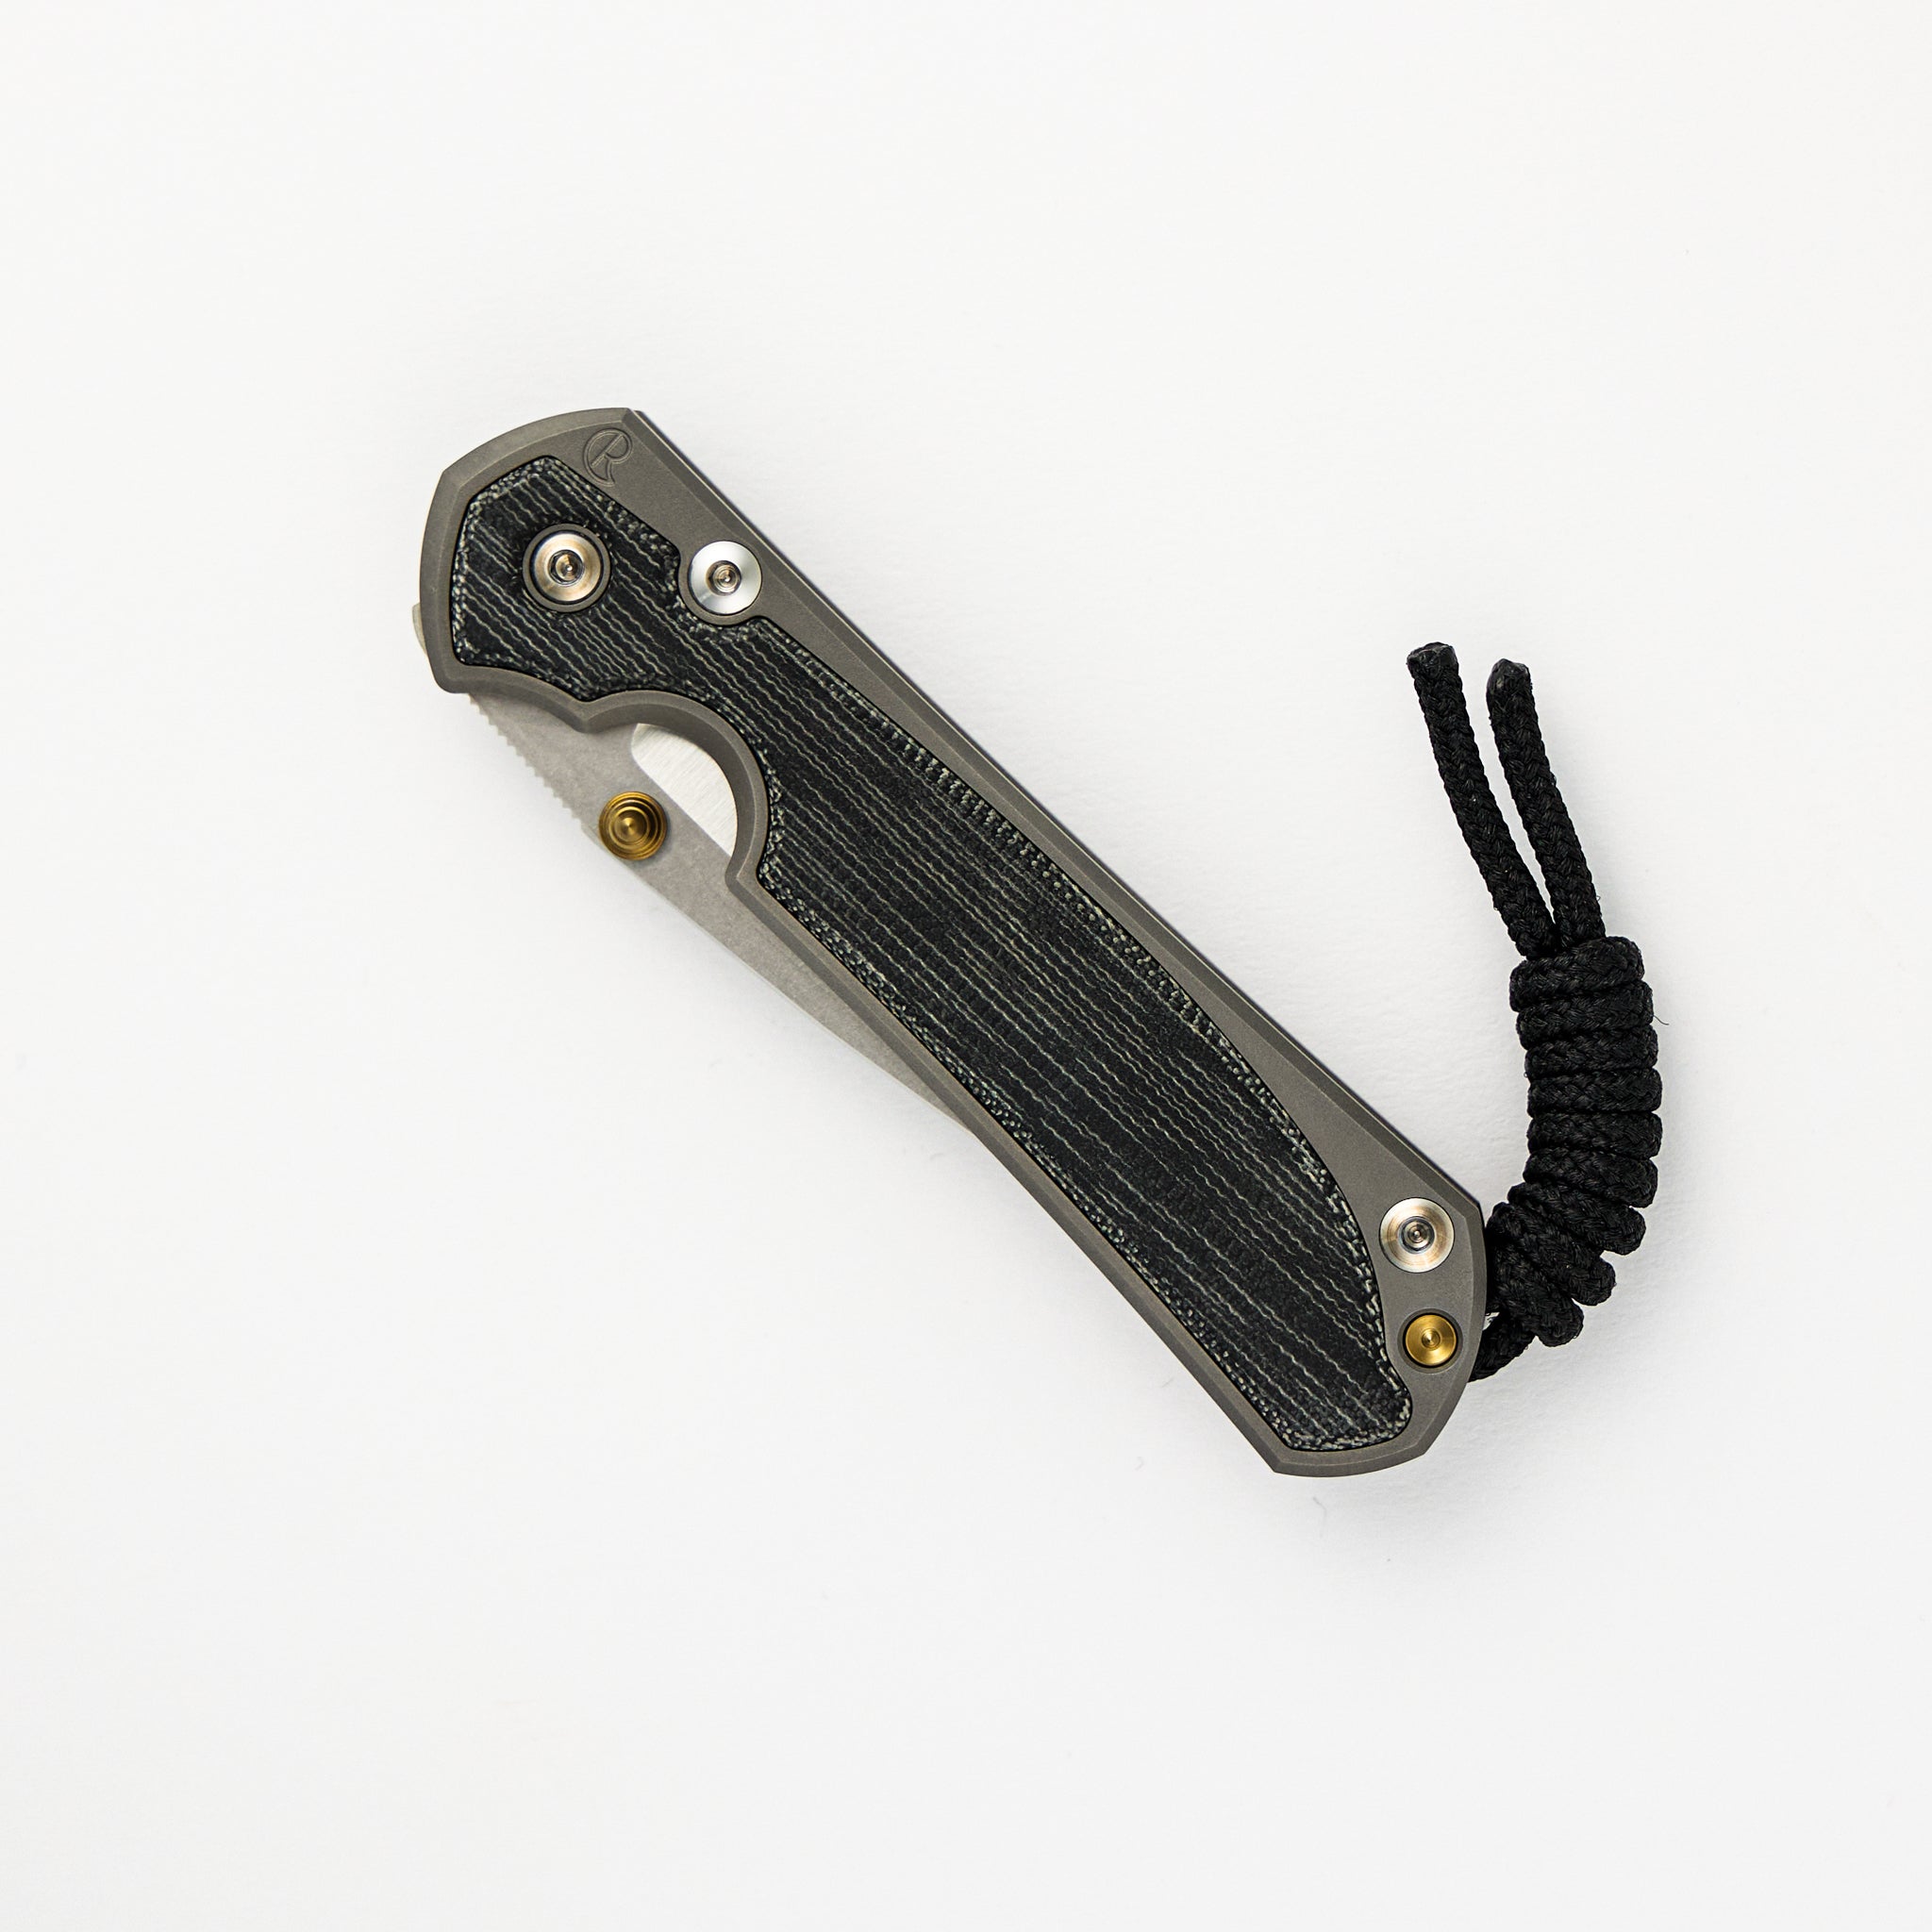 CHRIS REEVE SMALL SEBENZA 31 BLACK CANVAS MICARTA INLAY – POLISHED CPM MAGNACUT BLADE – GLASS BLASTED – GOLD DOUBLE THUMB LUGS